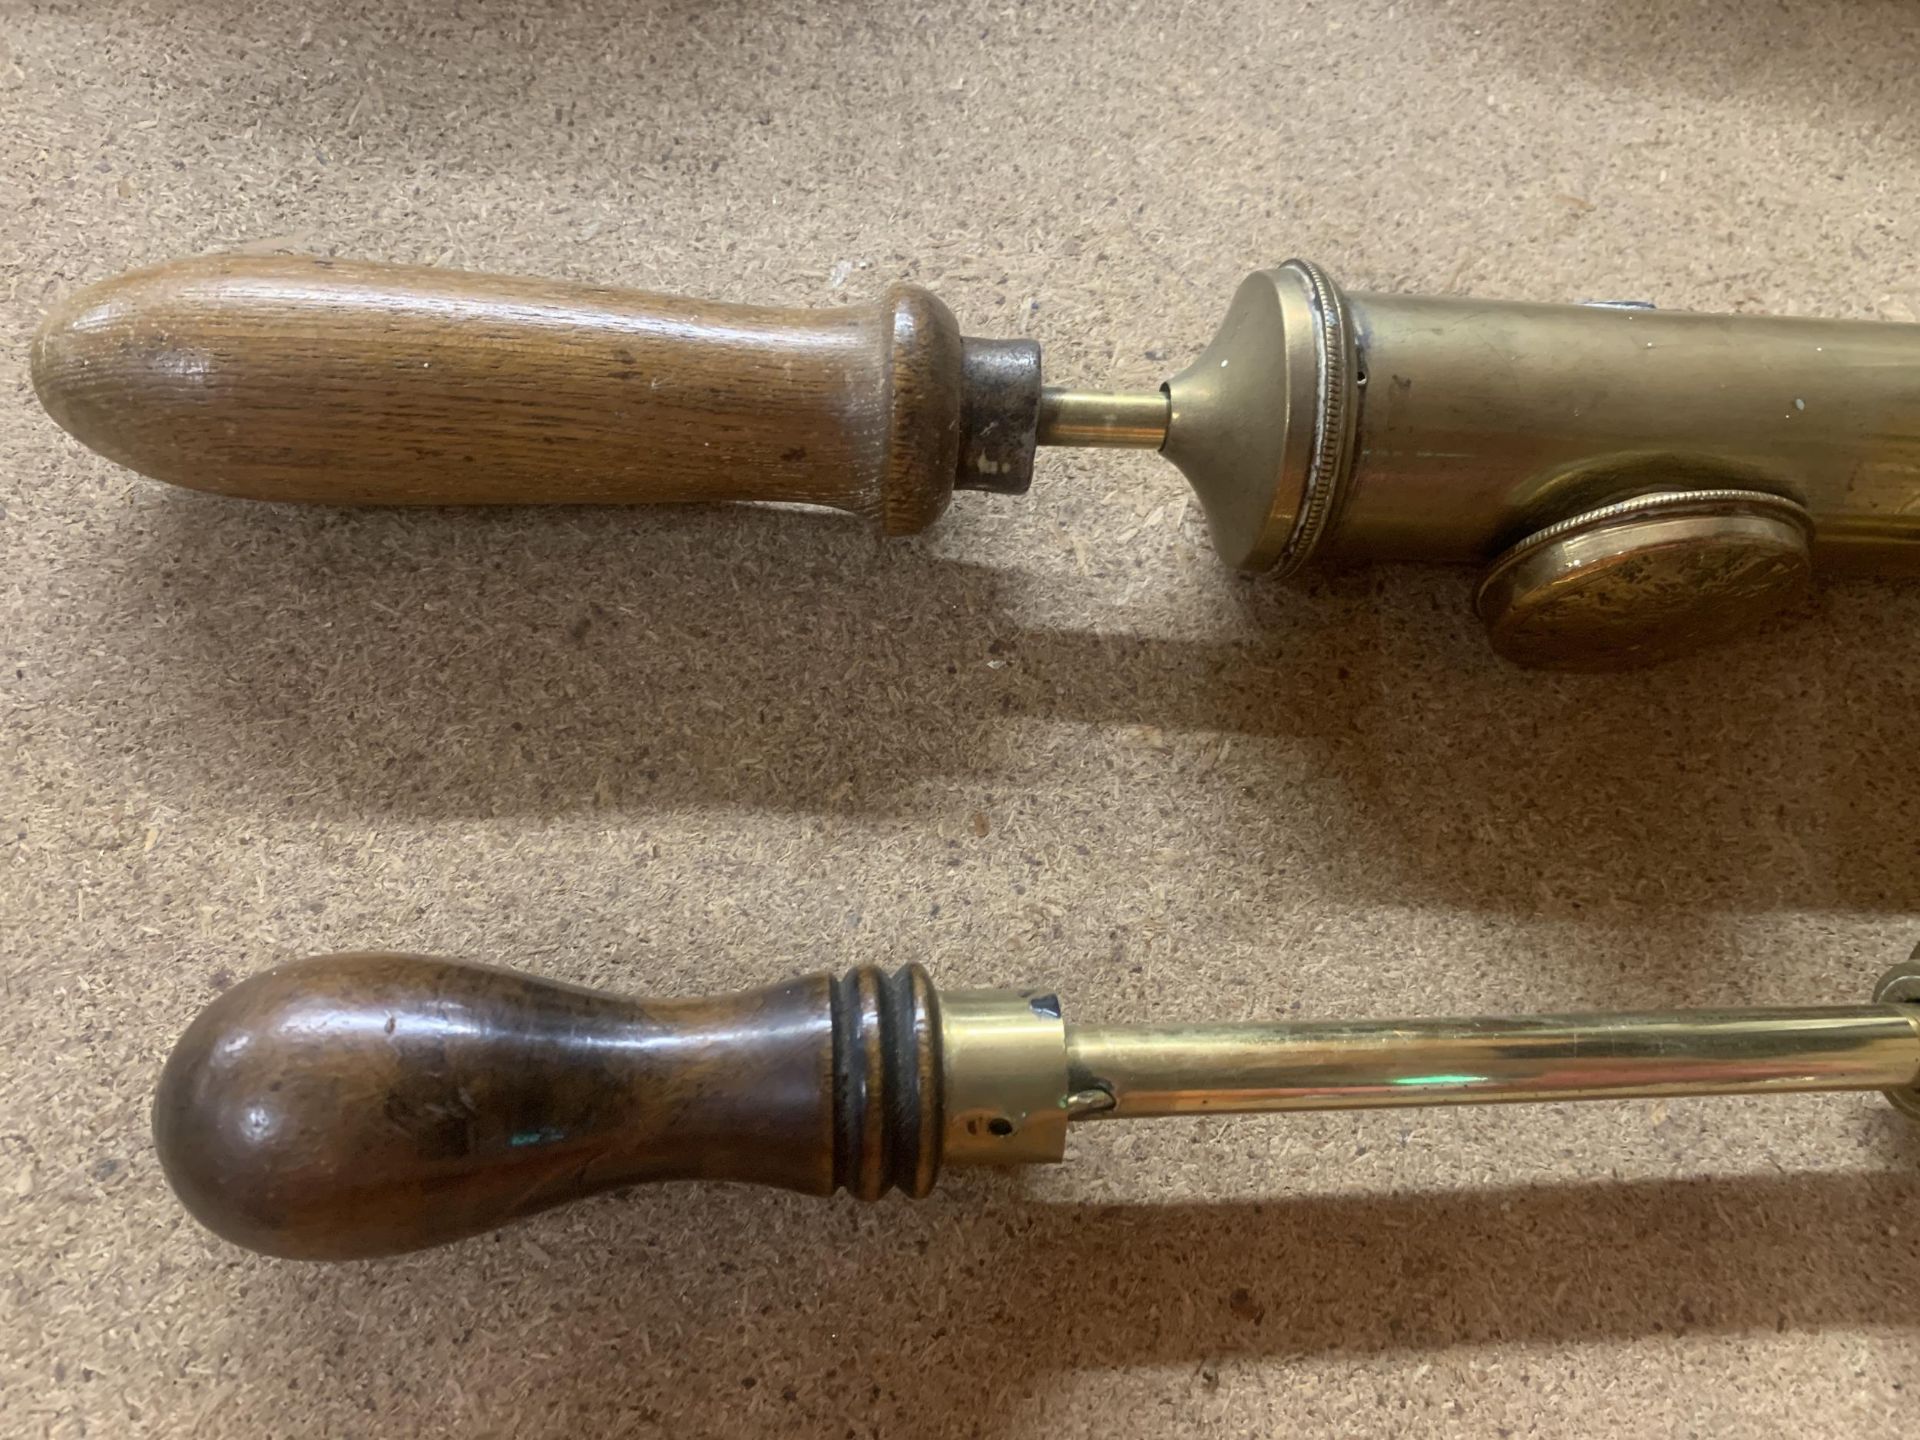 A PAIR OF VINTAGE BRASS HORTICULTURAL SPRAYERS - Image 2 of 4